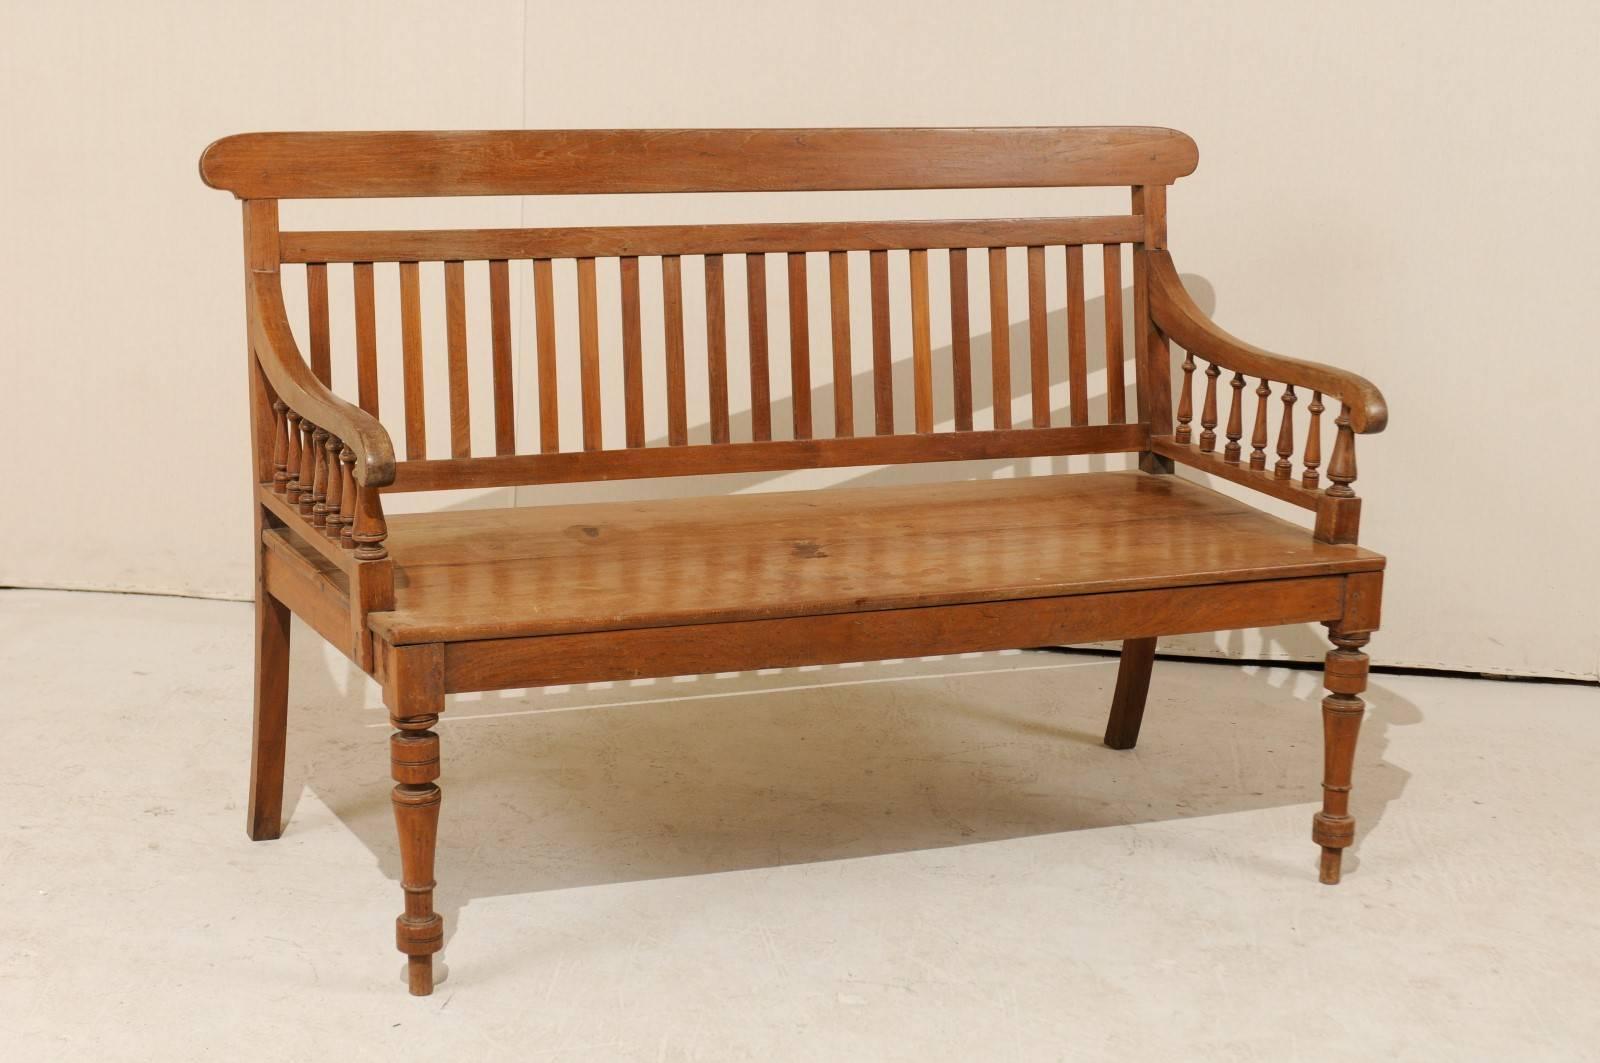 Indian British Colonial Style Teak Wood Bench with Slats on the Backrest & Turned Legs